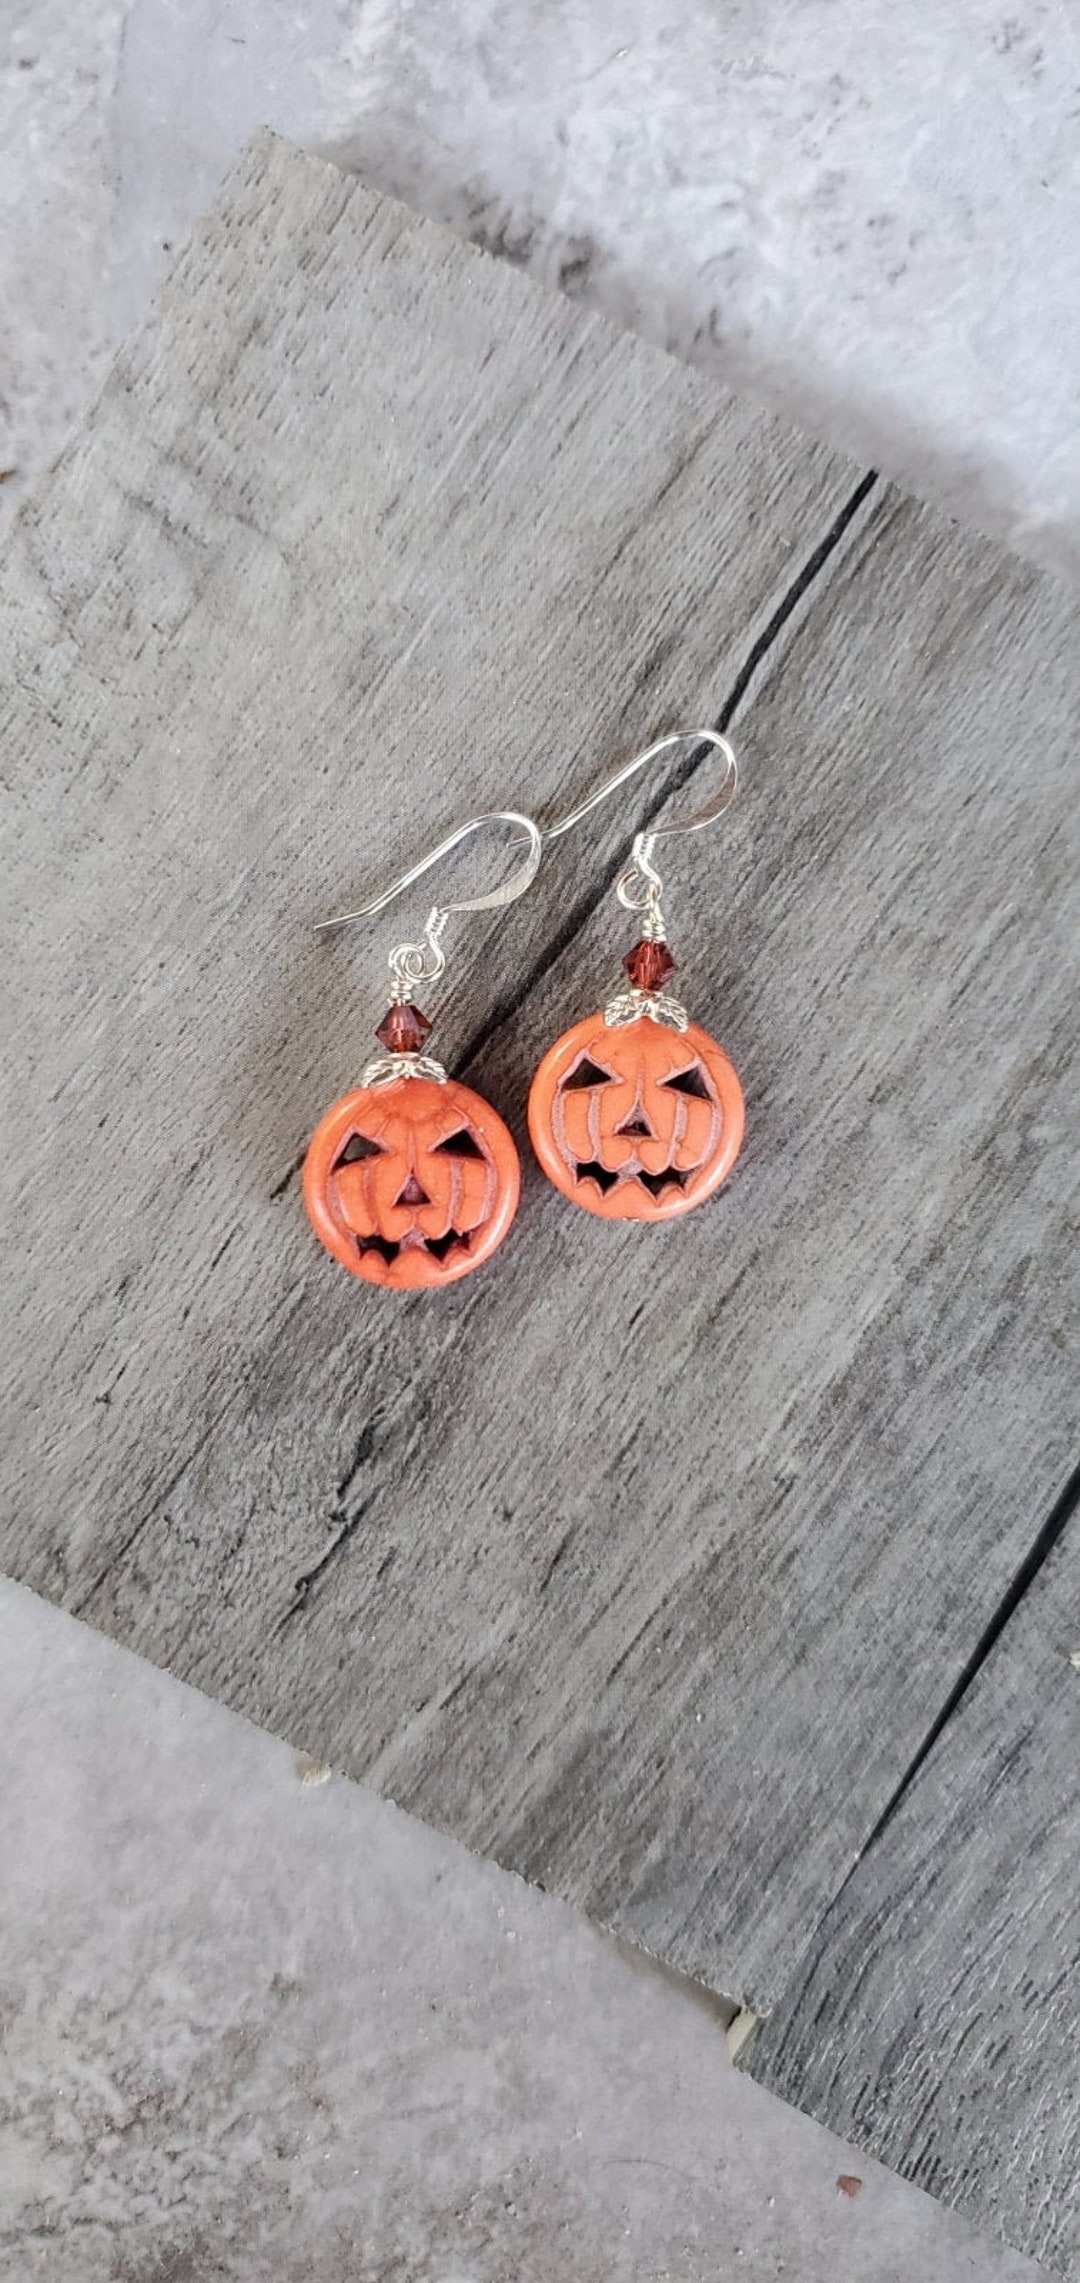 Darling Pumpkin Earrings With a 4mm Swarovski Crystal Accent - Etsy